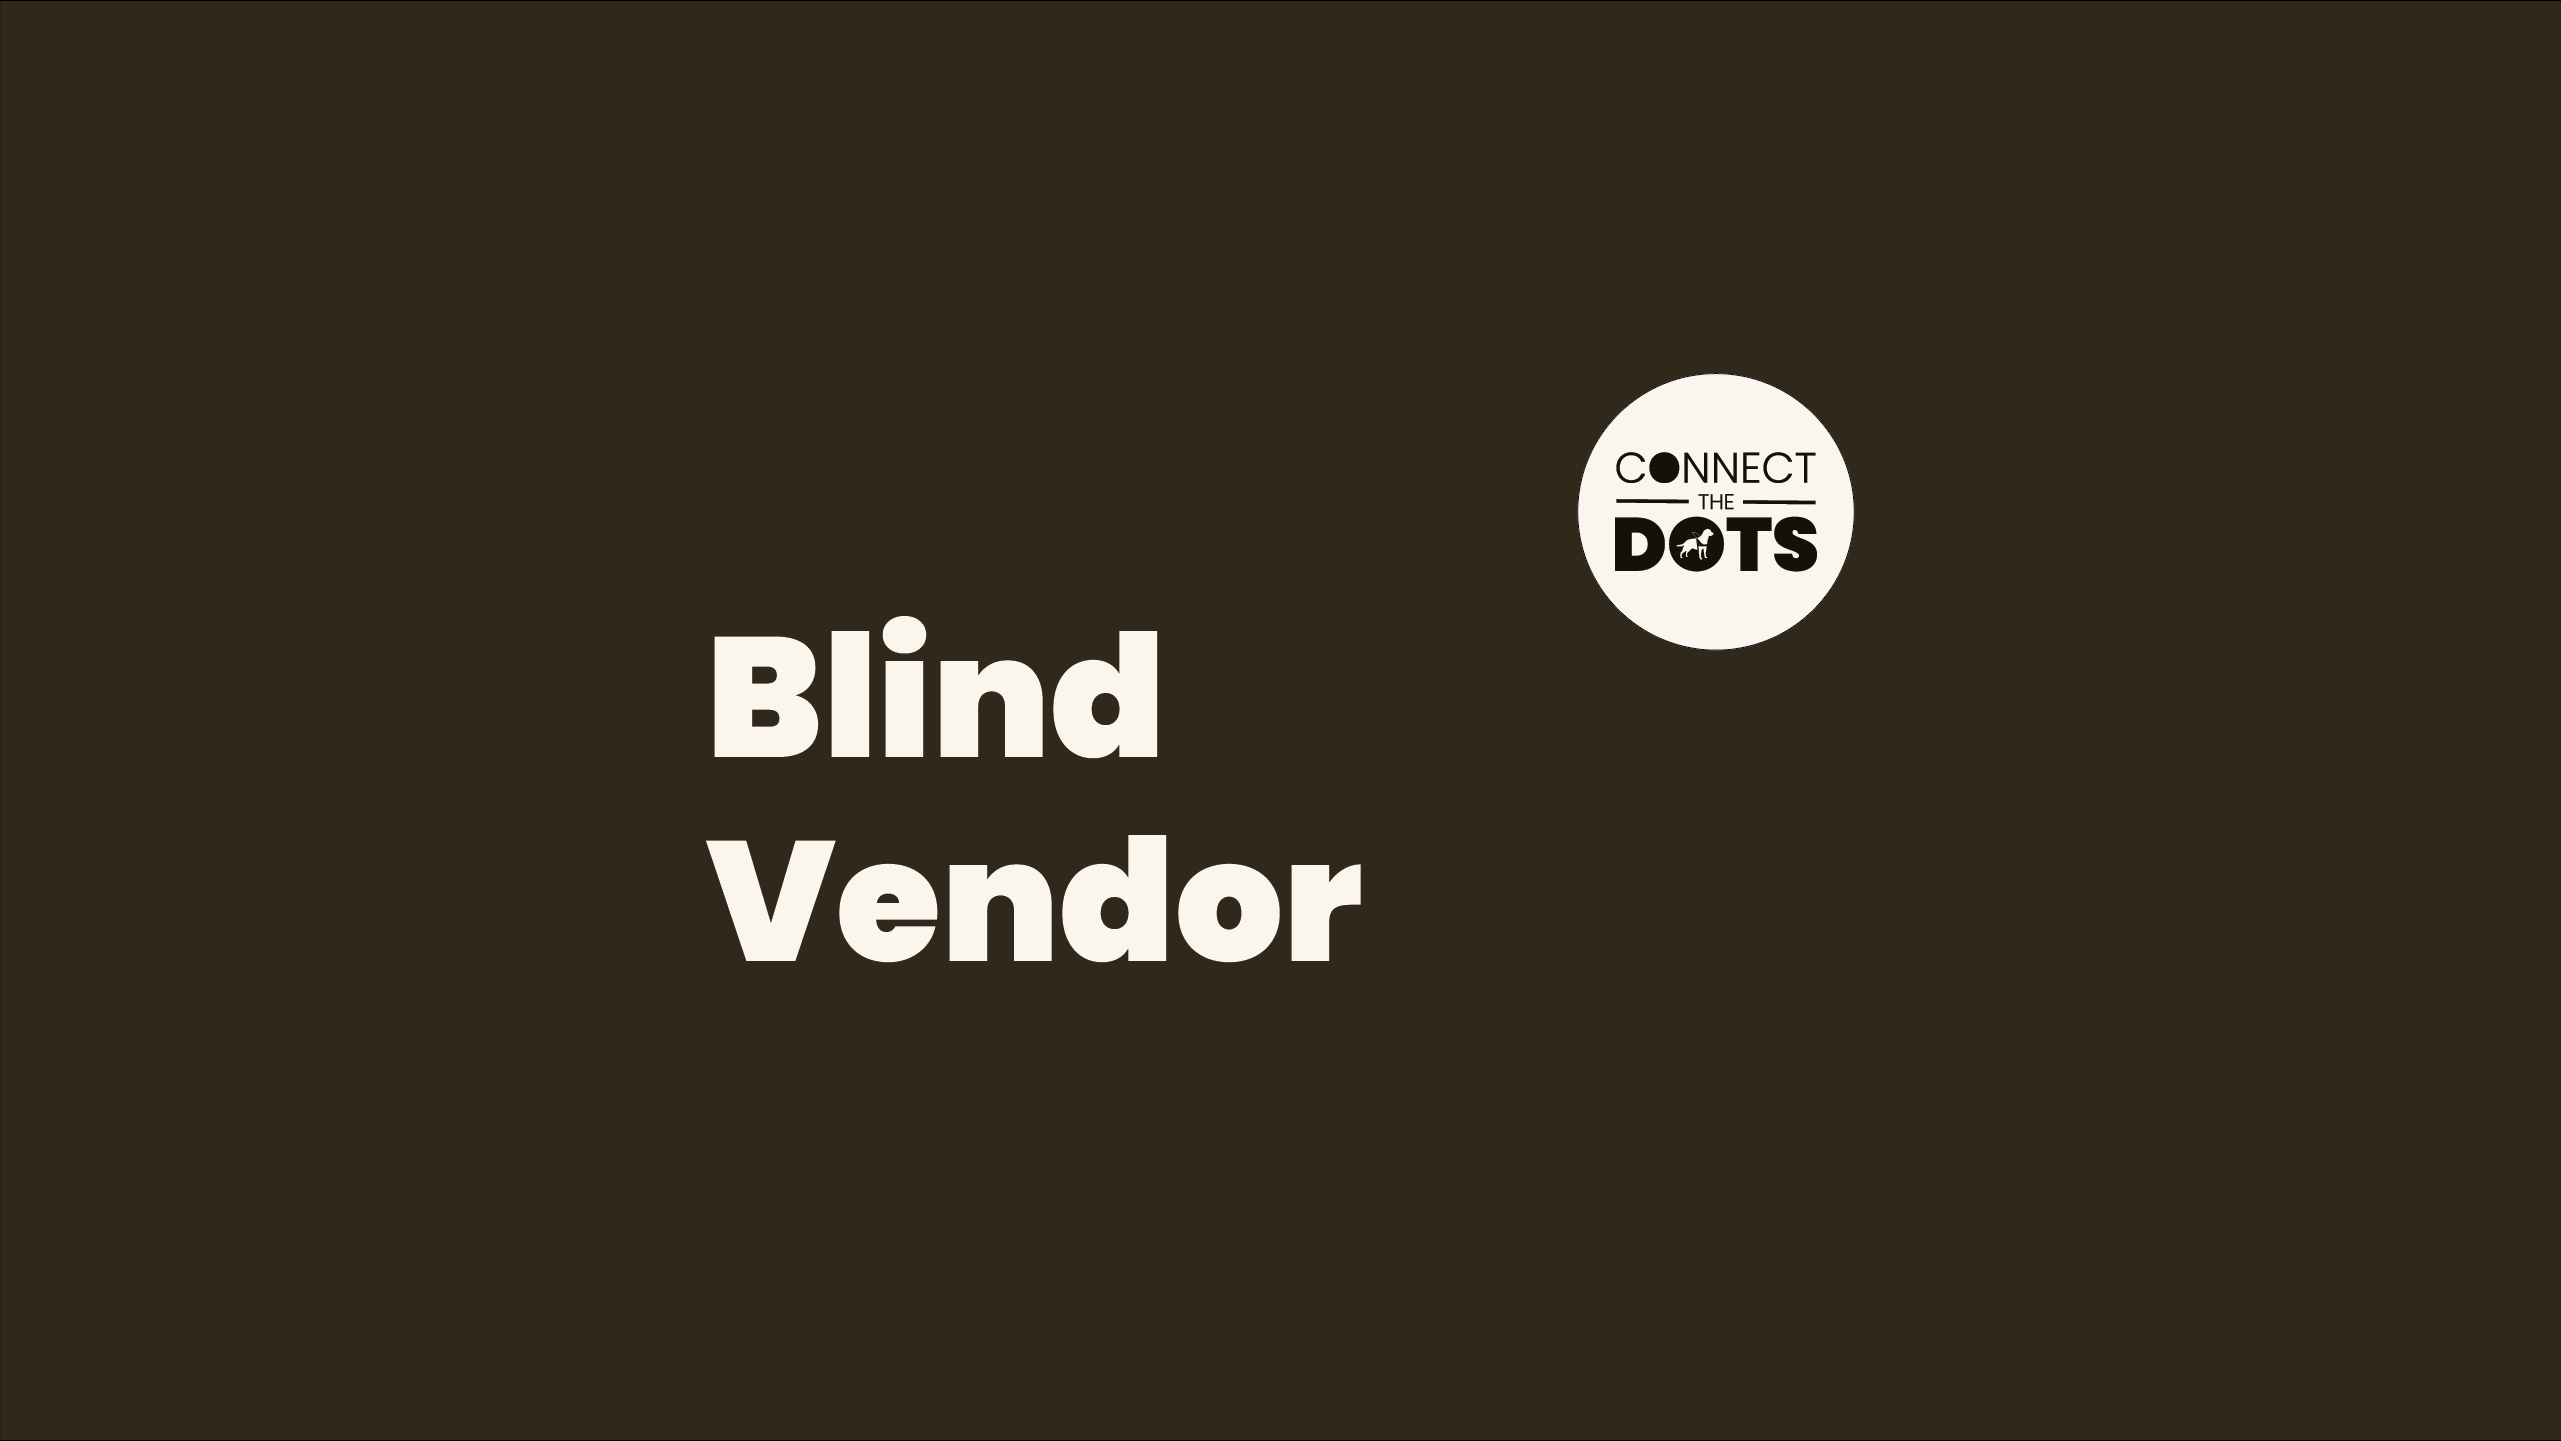 Blind Vendor - Blind and Visually Impaired Professionals